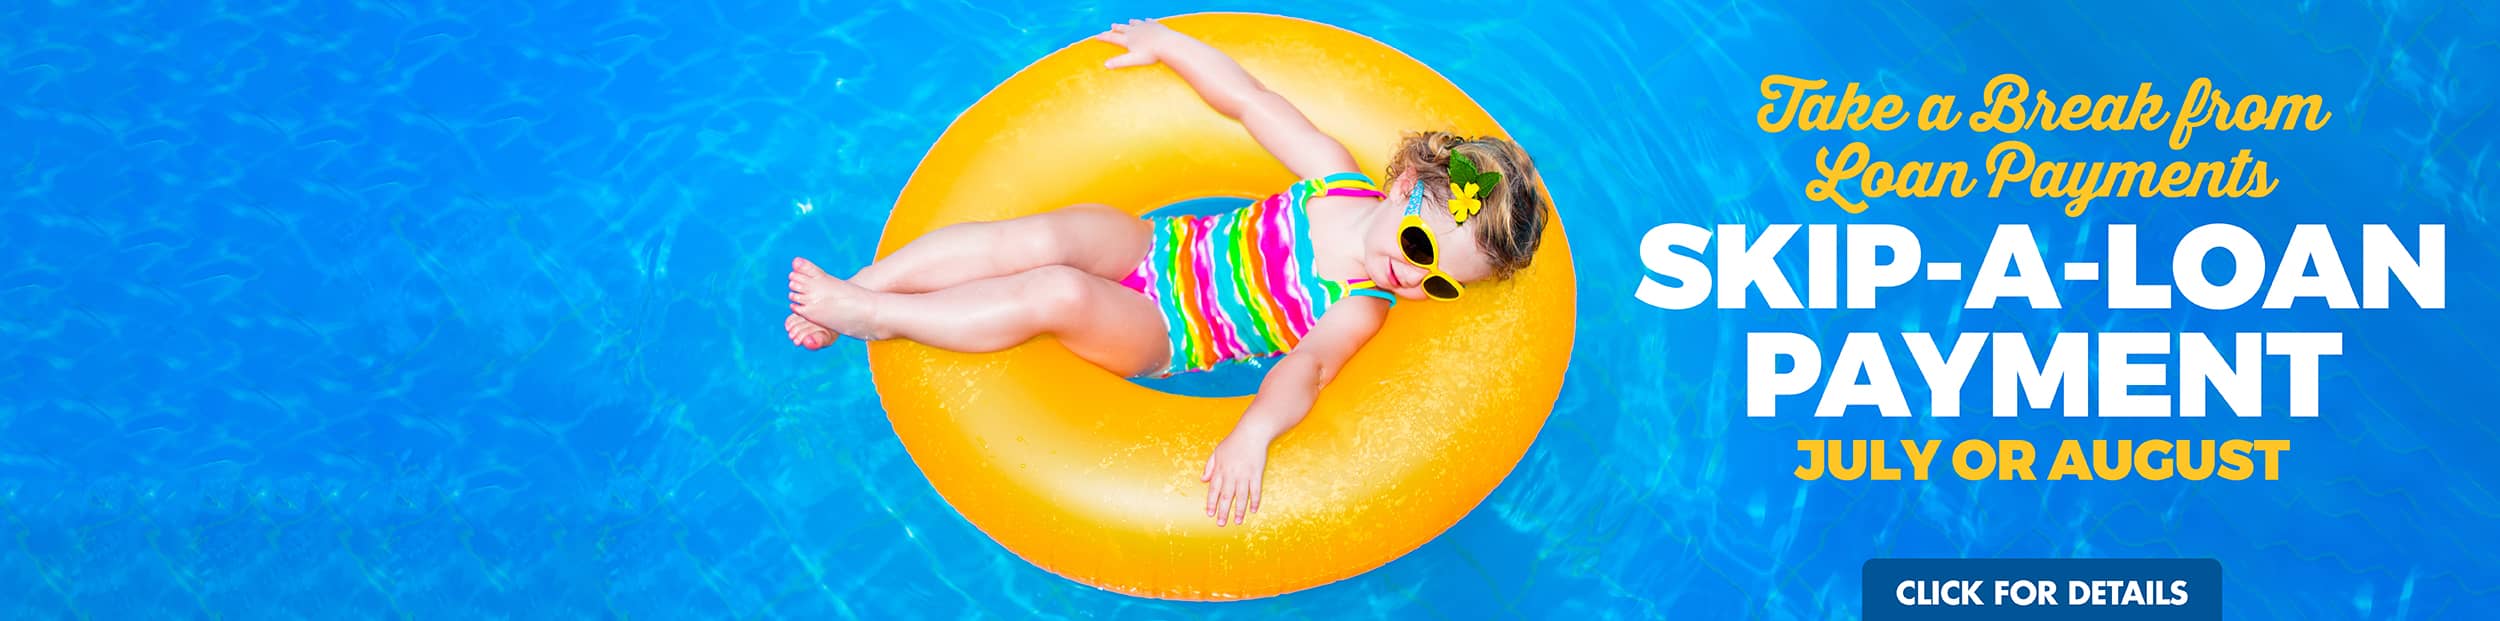 Little girl relaxing while floating on a yellow tube in the pool.